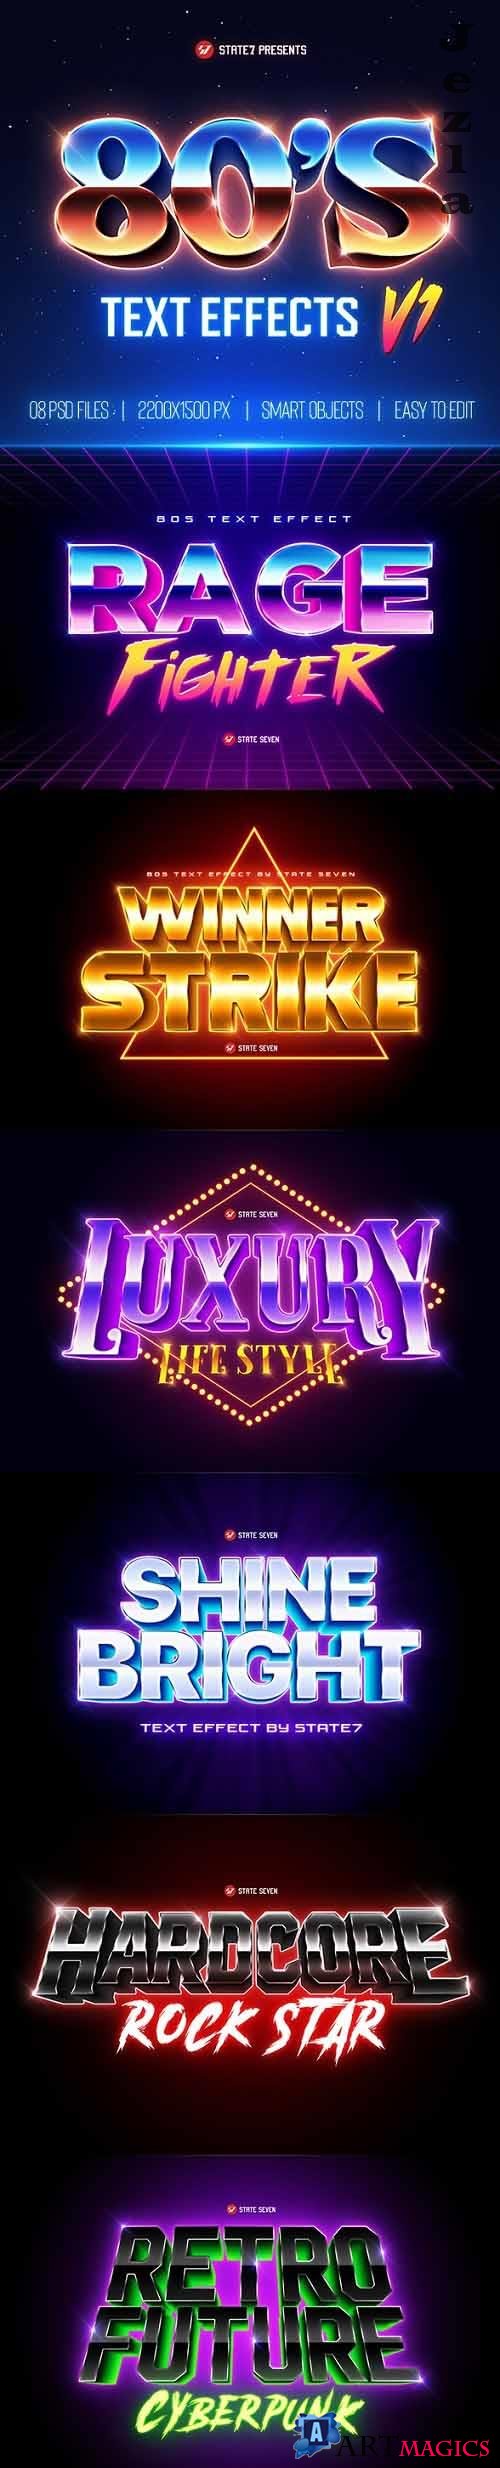 GraphicRiver - 80s Text Effects V1 29259774